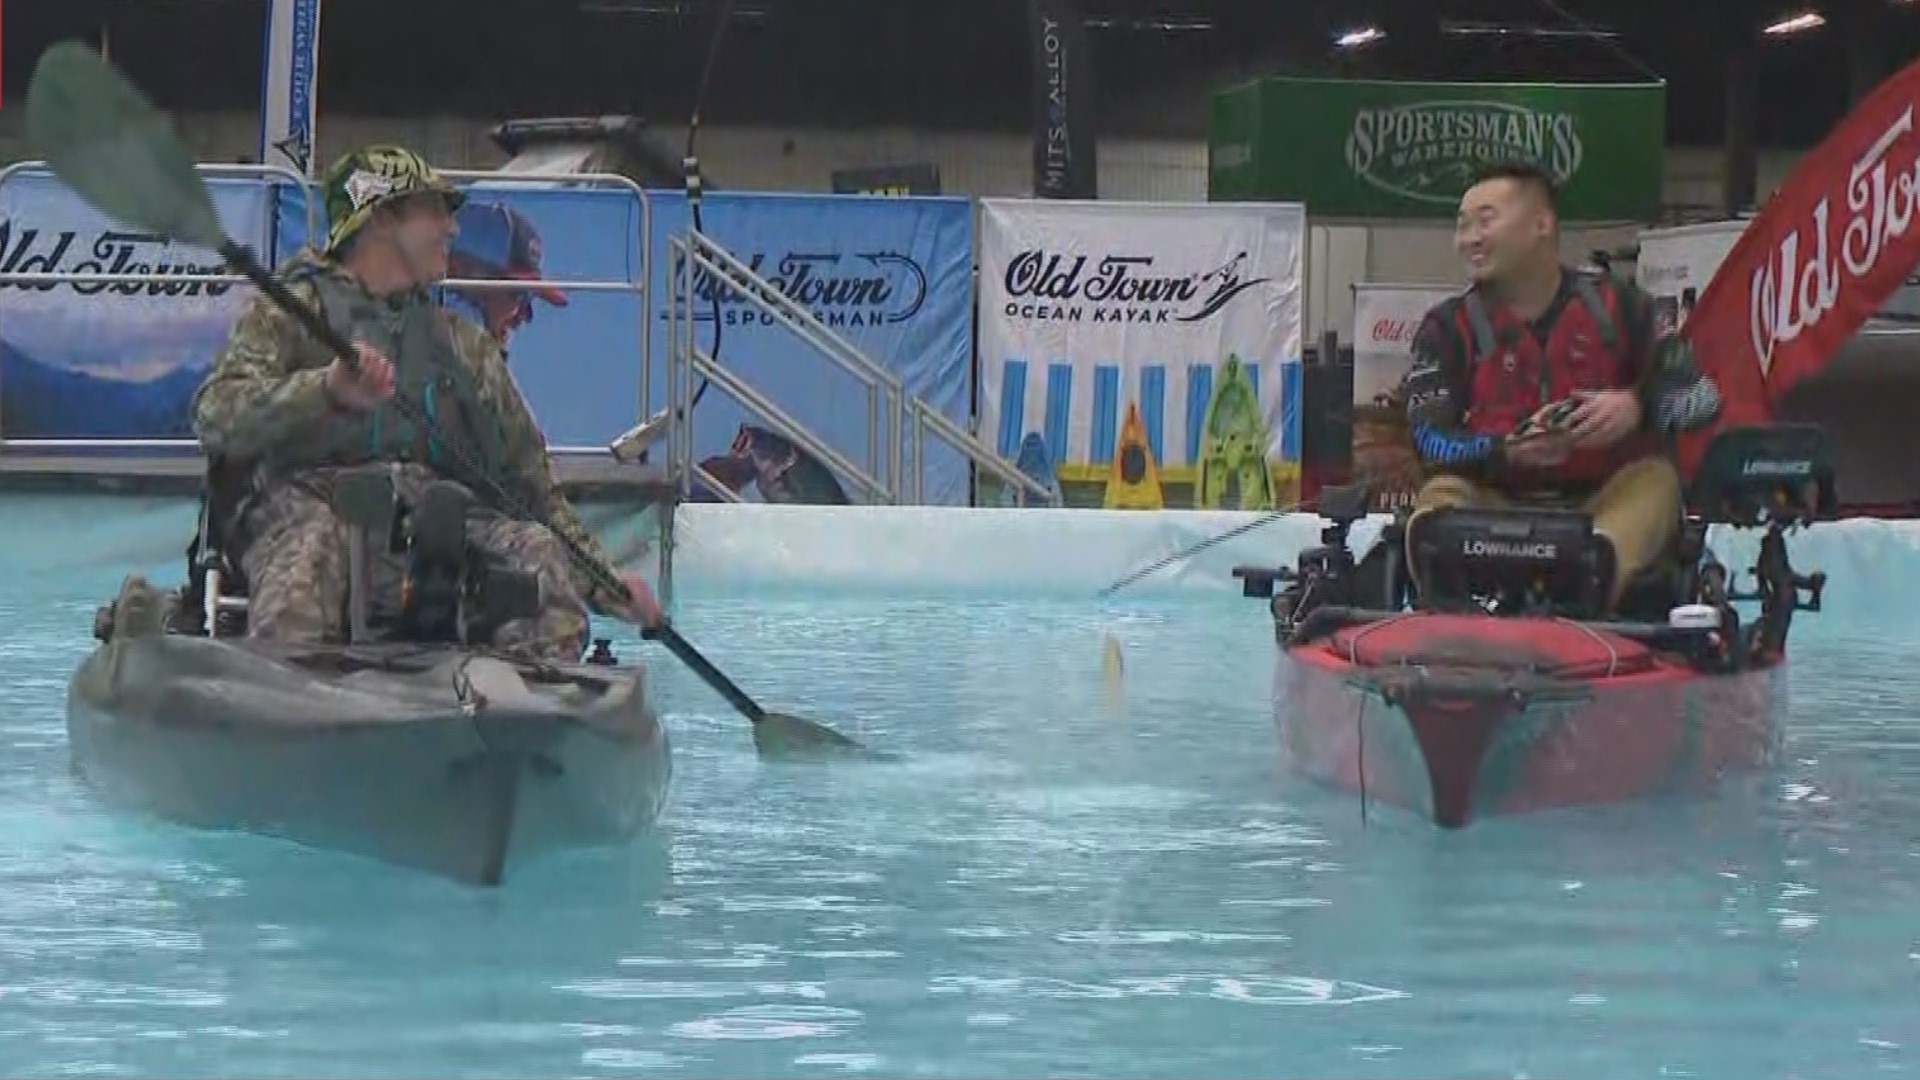 The Pacific Northwest Sportsmen's show runs Feb. 15-19 at the Portland Expo Center. Drew Carney checked it out.